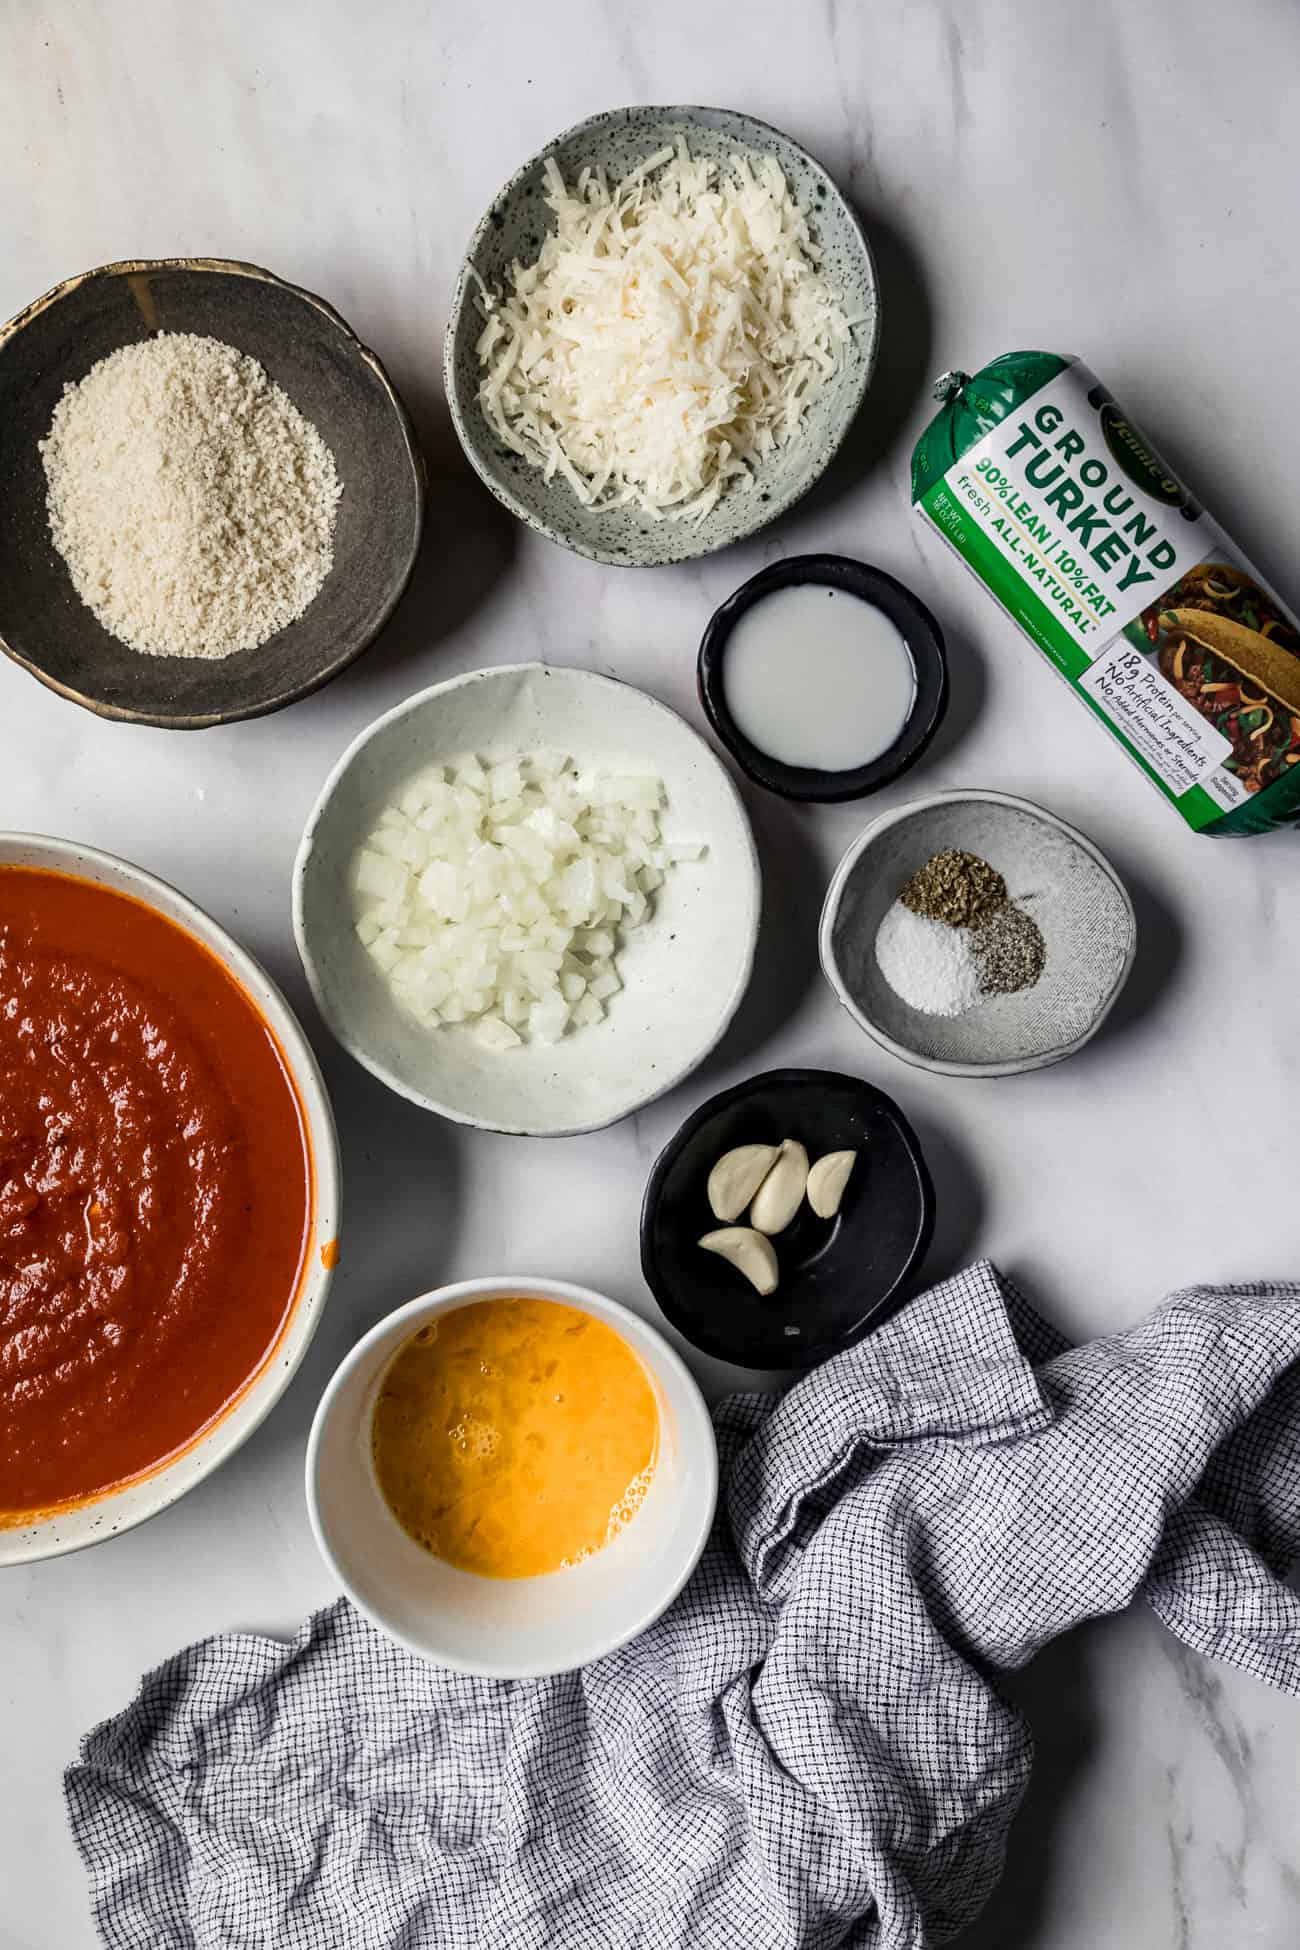 ingredients laid out to make instant pot meatballs: red sauce, eggs, garlic, onion, herbs, parmesan, bread crumbs, milk, and ground turkey.